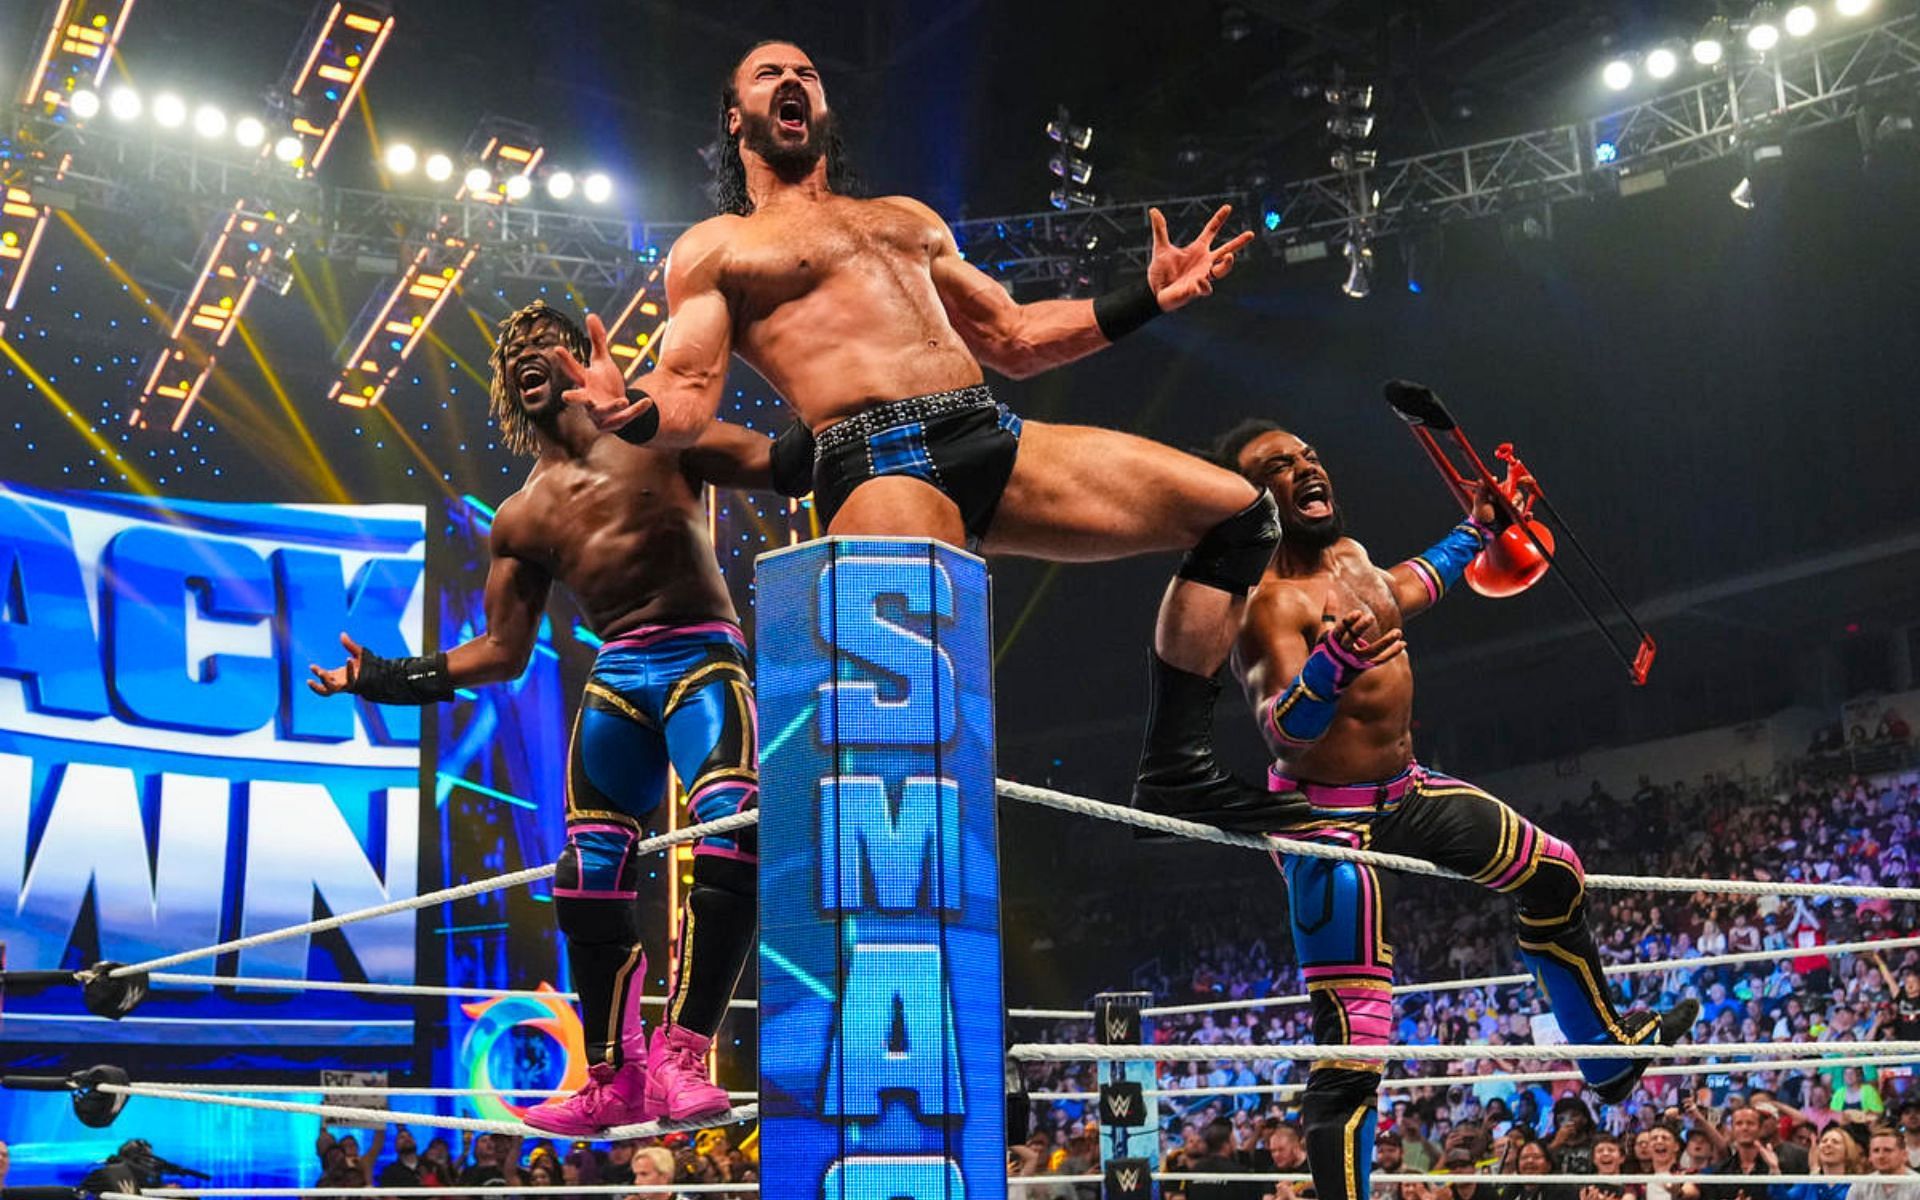 Drew McIntyre and The New Day celebrating their win last week on the blue brand